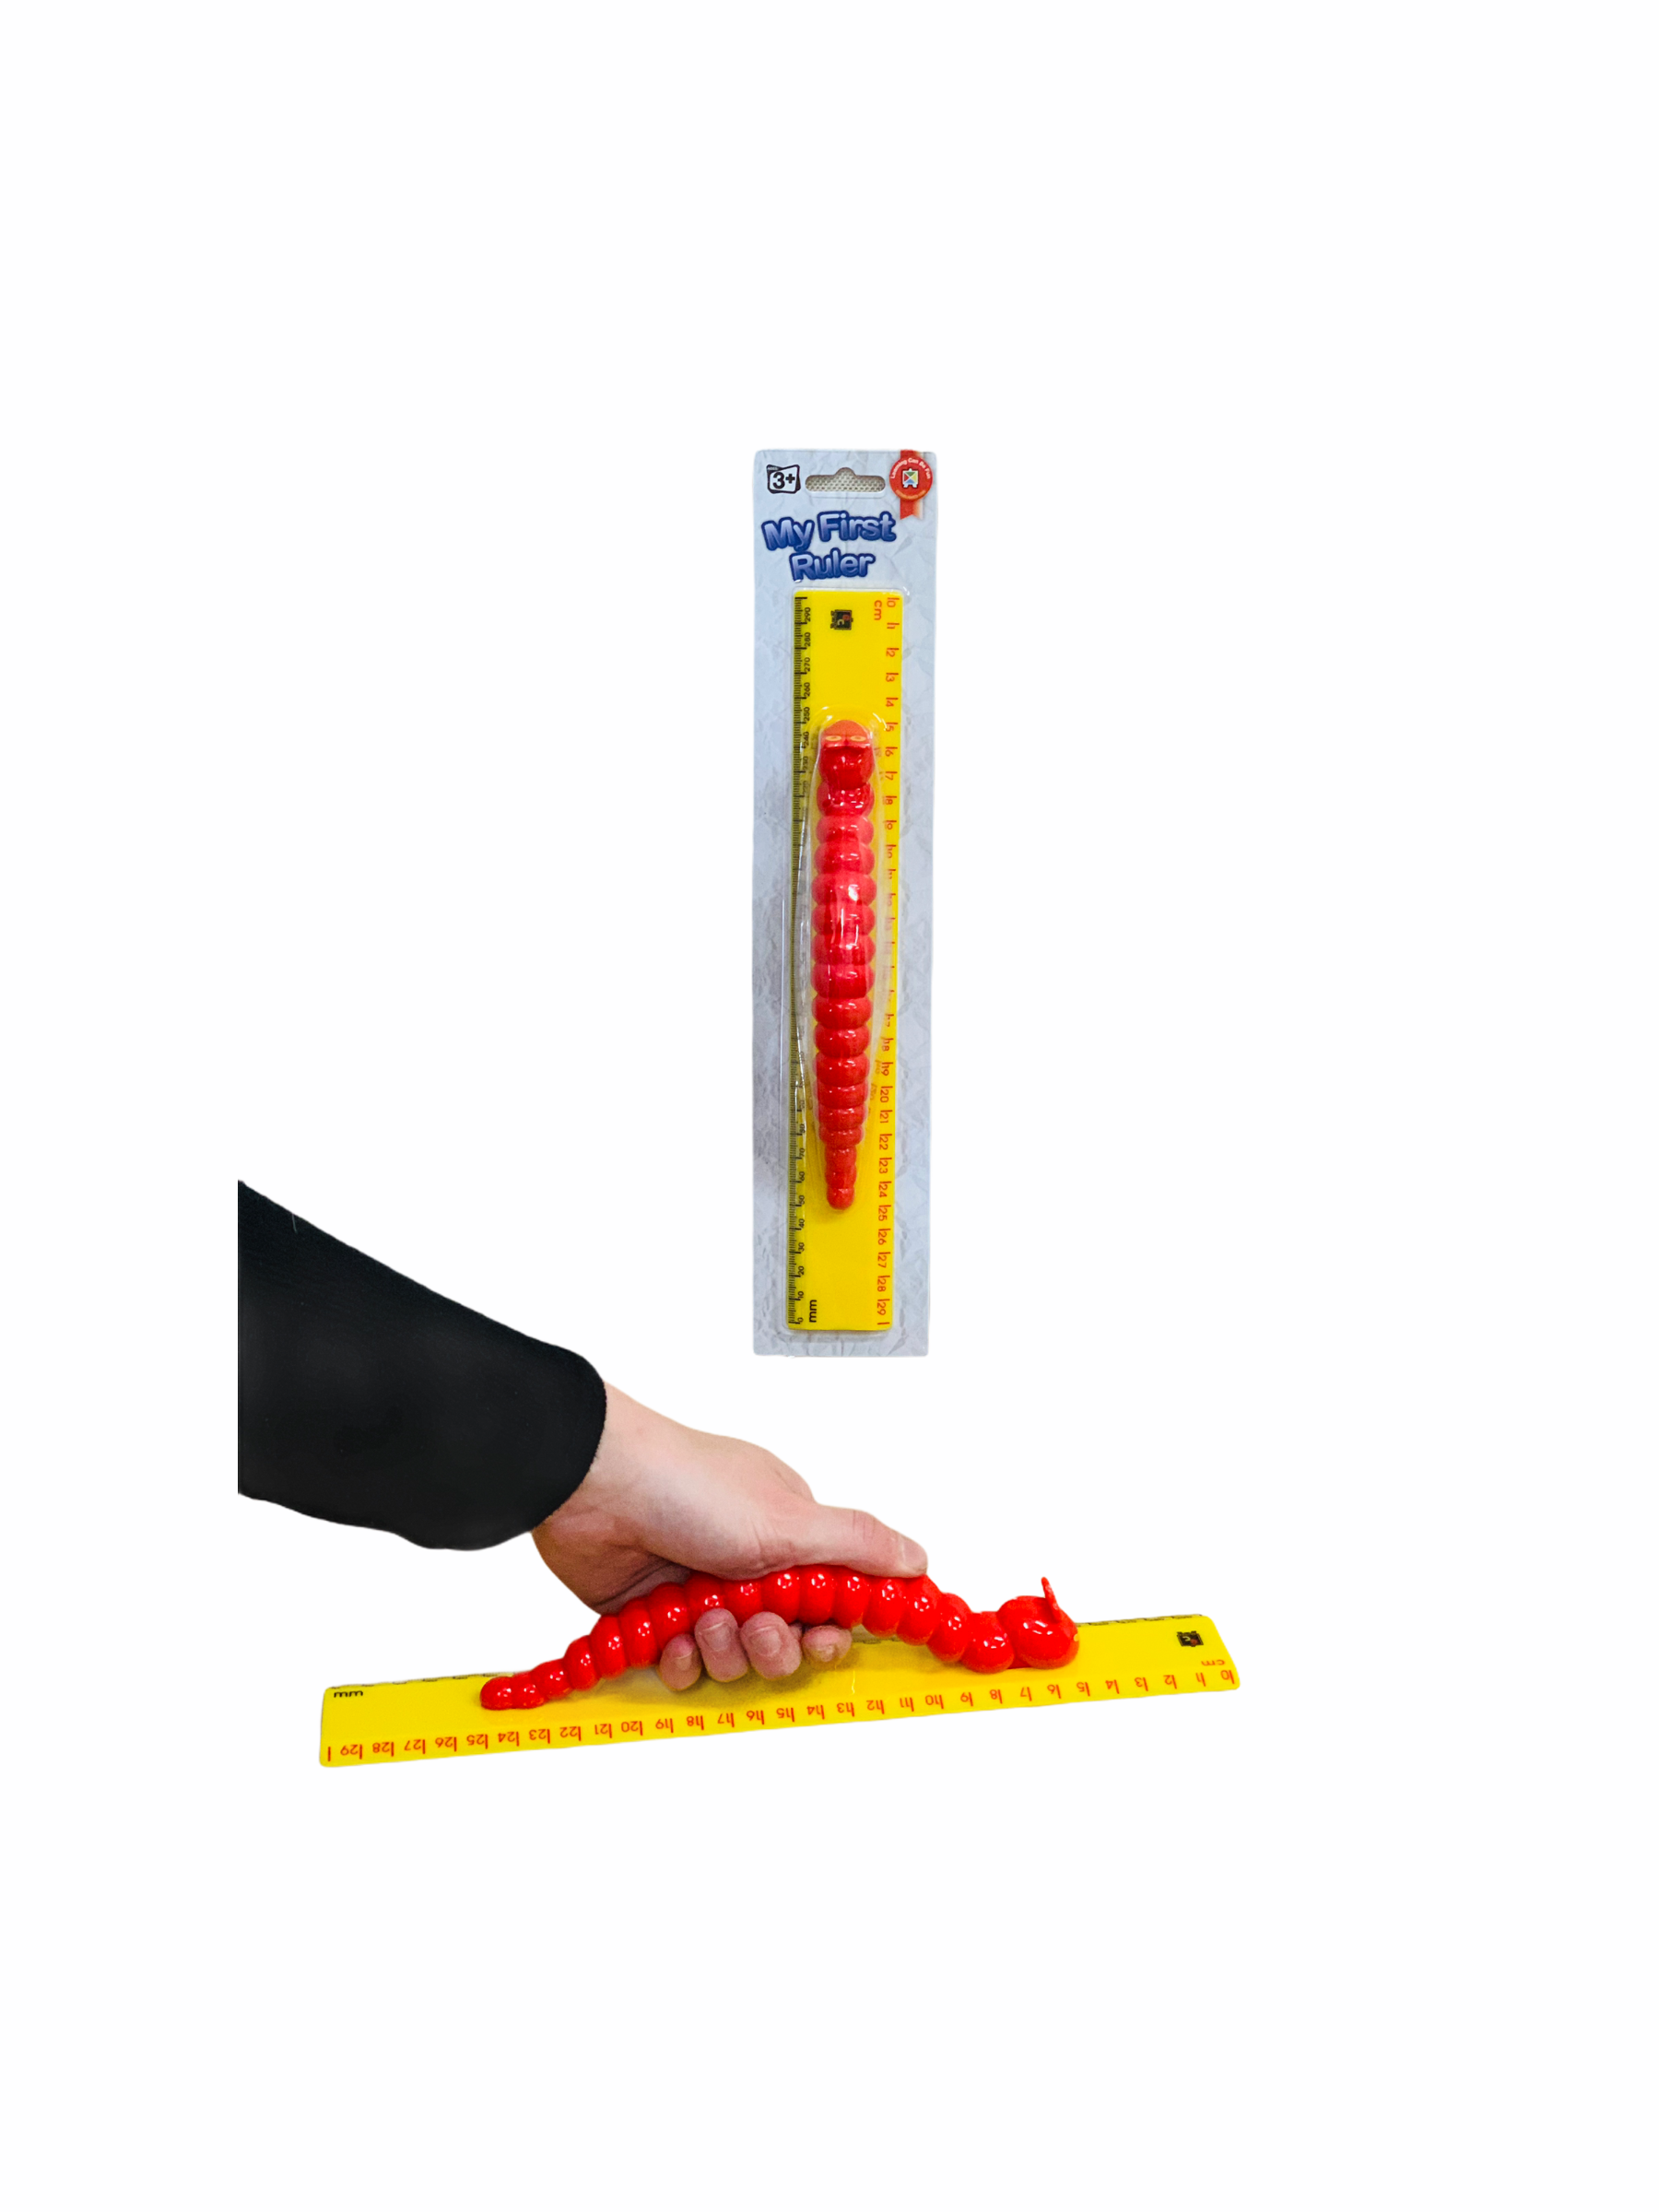 Easy Grip Caterpillar Ruler with hand holding red body of caterpillar on white background